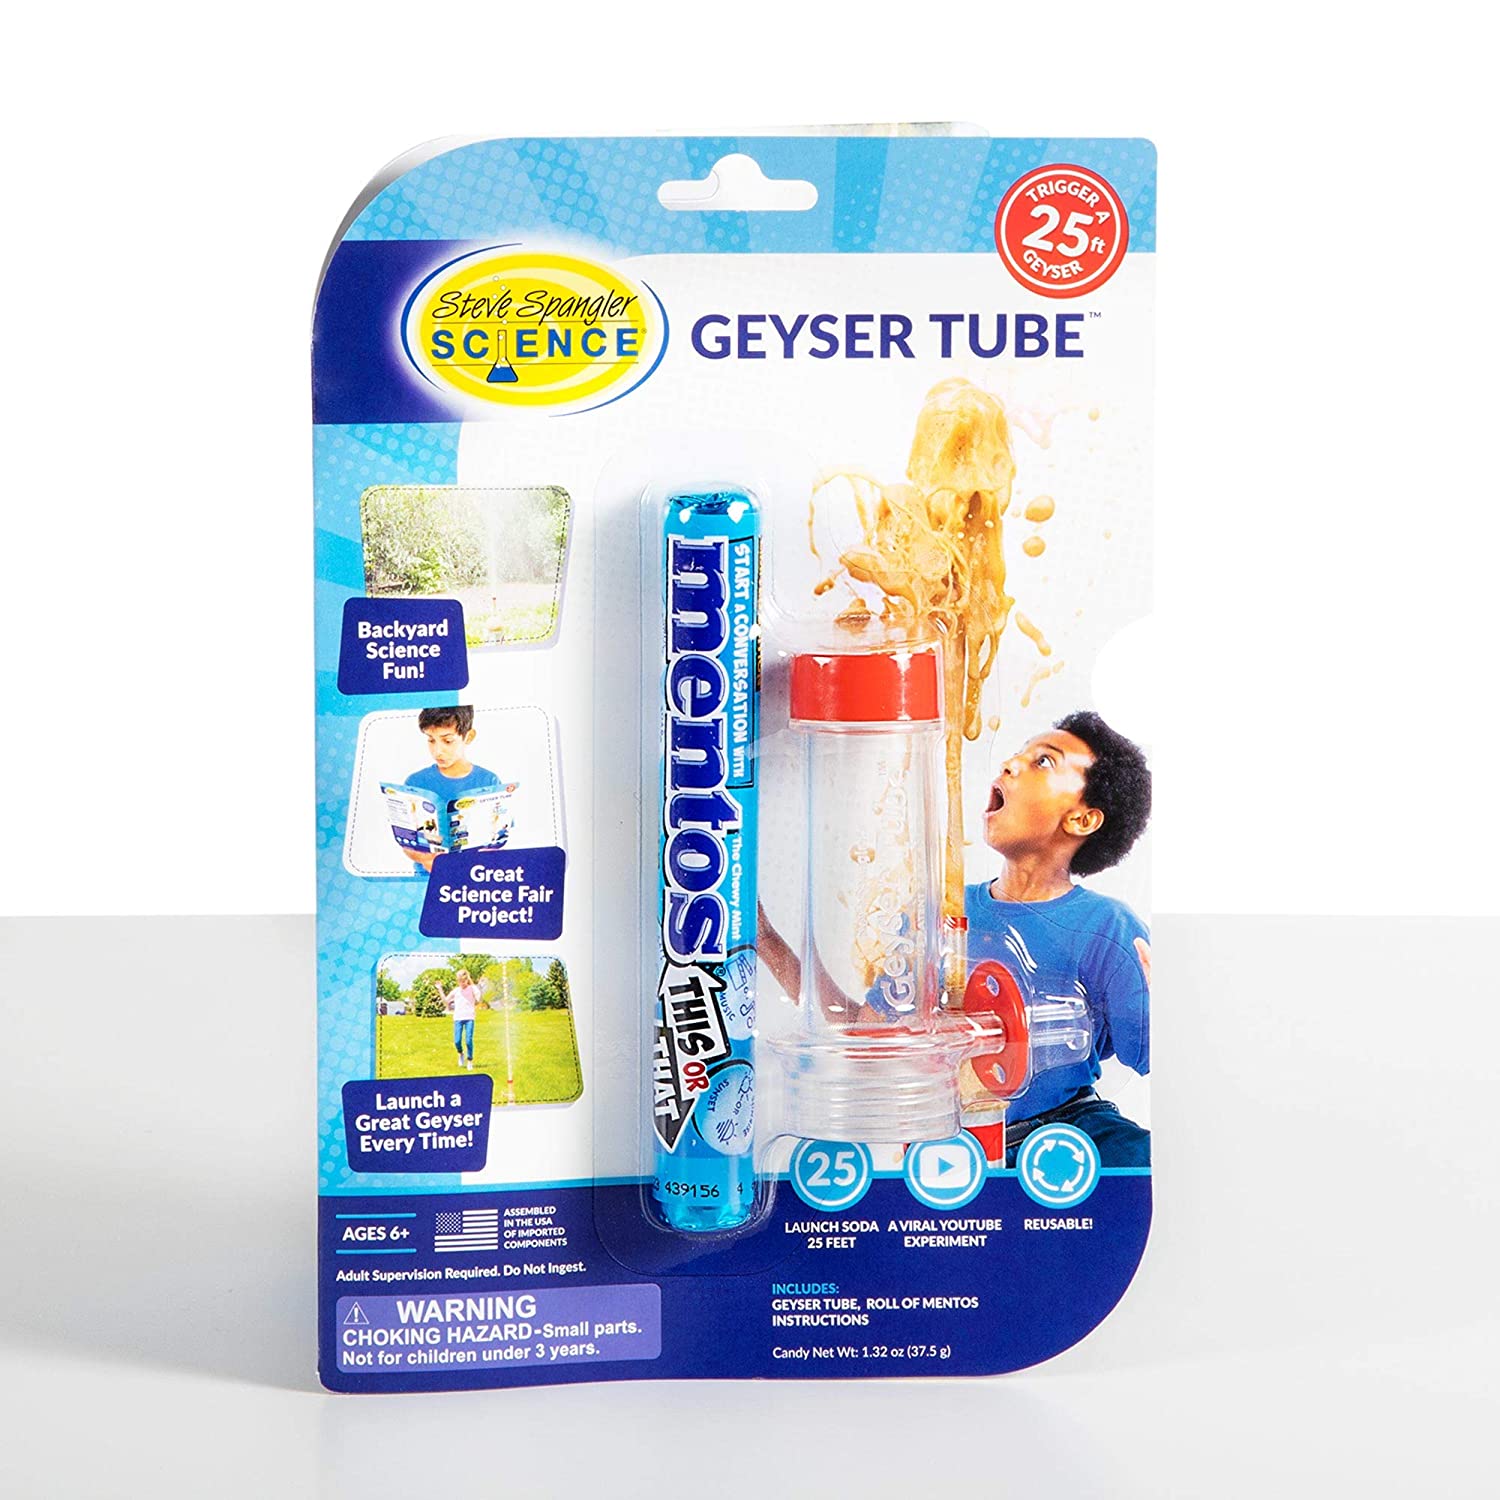 Steve Spangler Science Extreme Geyser Tube - Science Kit for Kids - Mentos & Soda Lab Experiment - Includes Tube, Candy, & Unique Spray Caps - Chemistry Magic - Classroom STEM Project